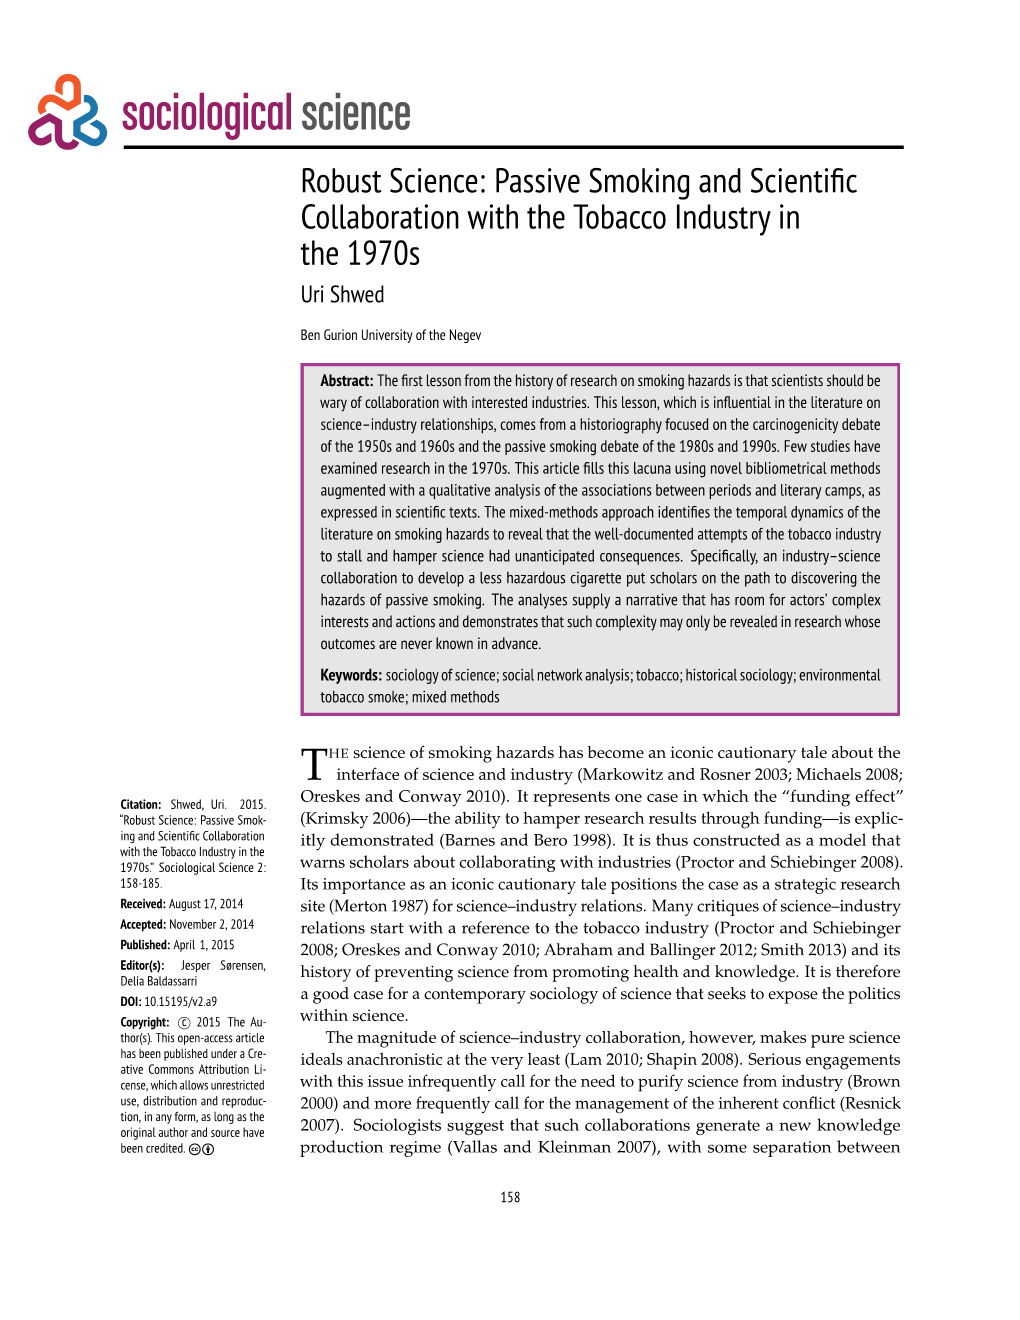 Passive Smoking and Scientific Collaboration with the Tobacco